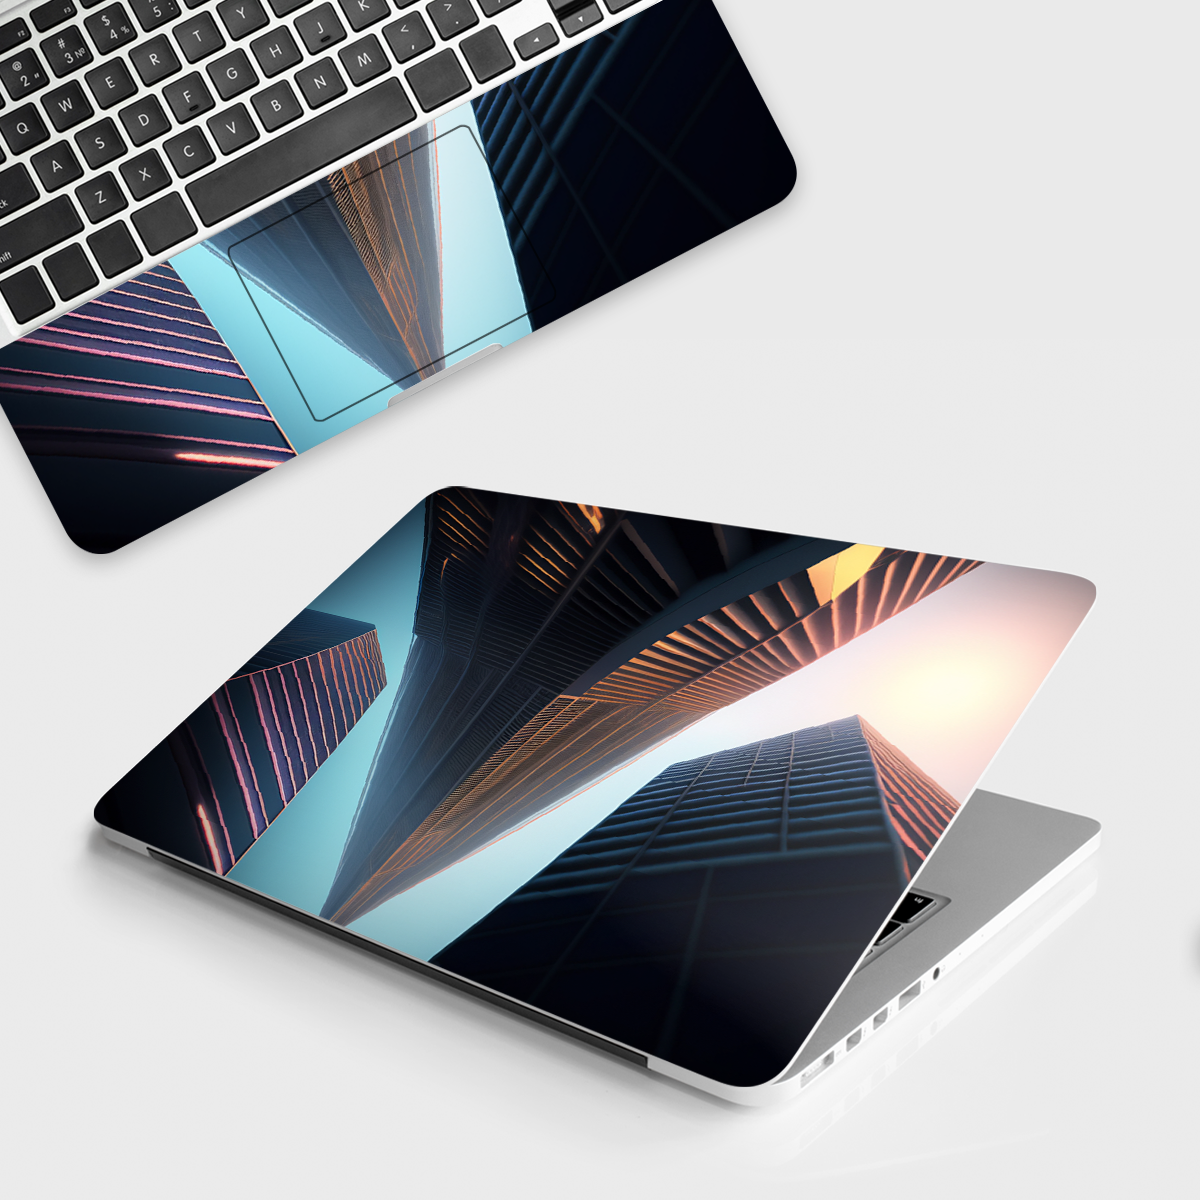 Fomo Store Laptop Skins Abstract Three Skycrapers